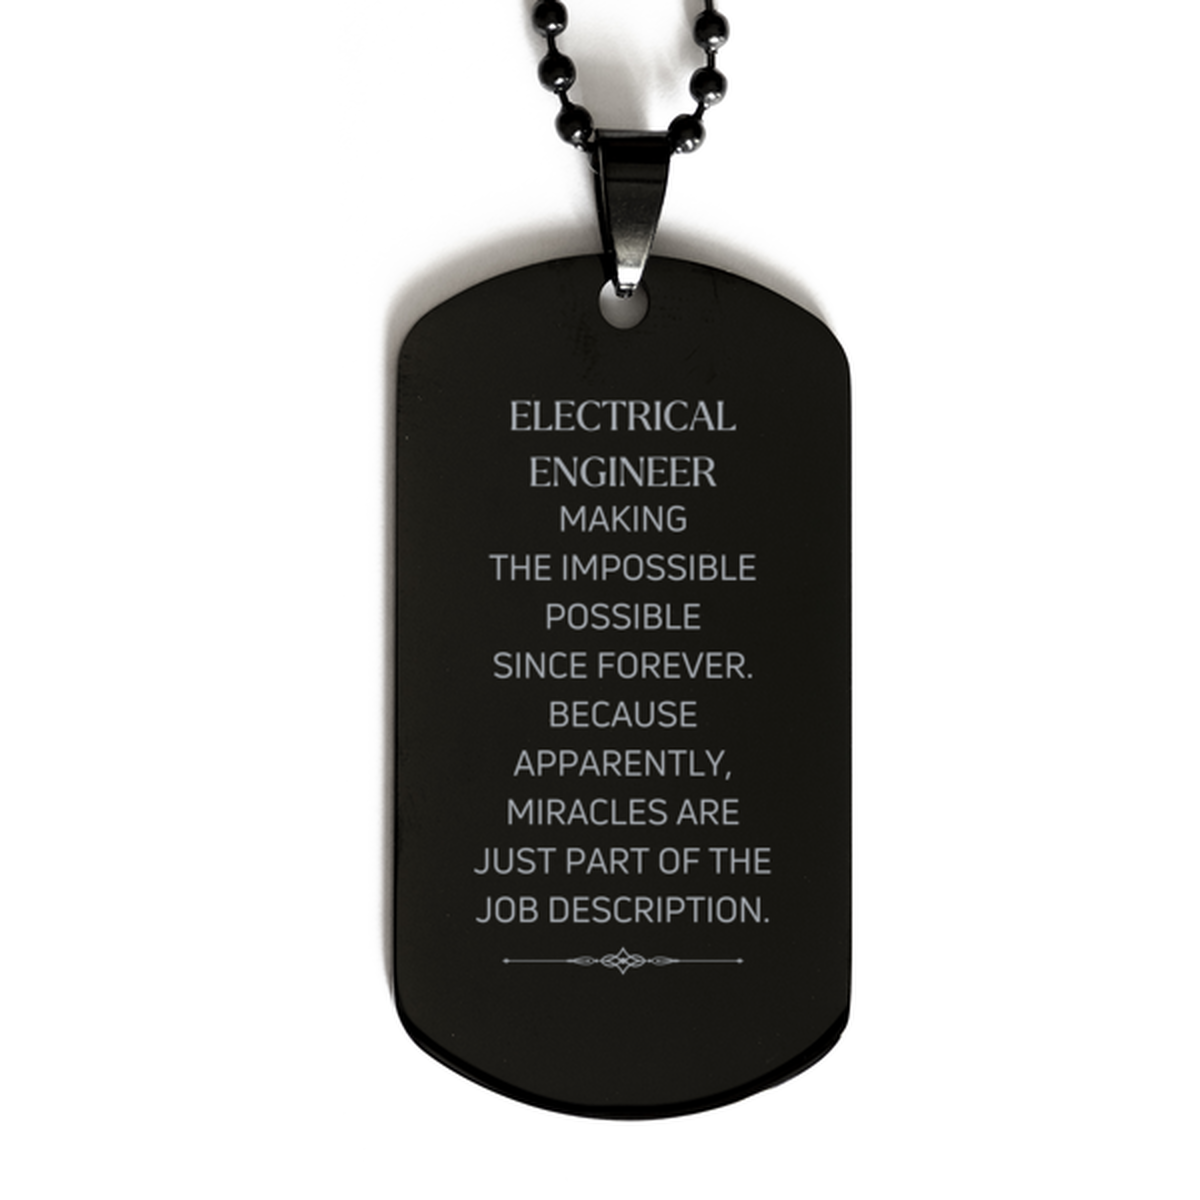 Funny Electrical Engineer Gifts, Miracles are just part of the job description, Inspirational Birthday Black Dog Tag For Electrical Engineer, Men, Women, Coworkers, Friends, Boss